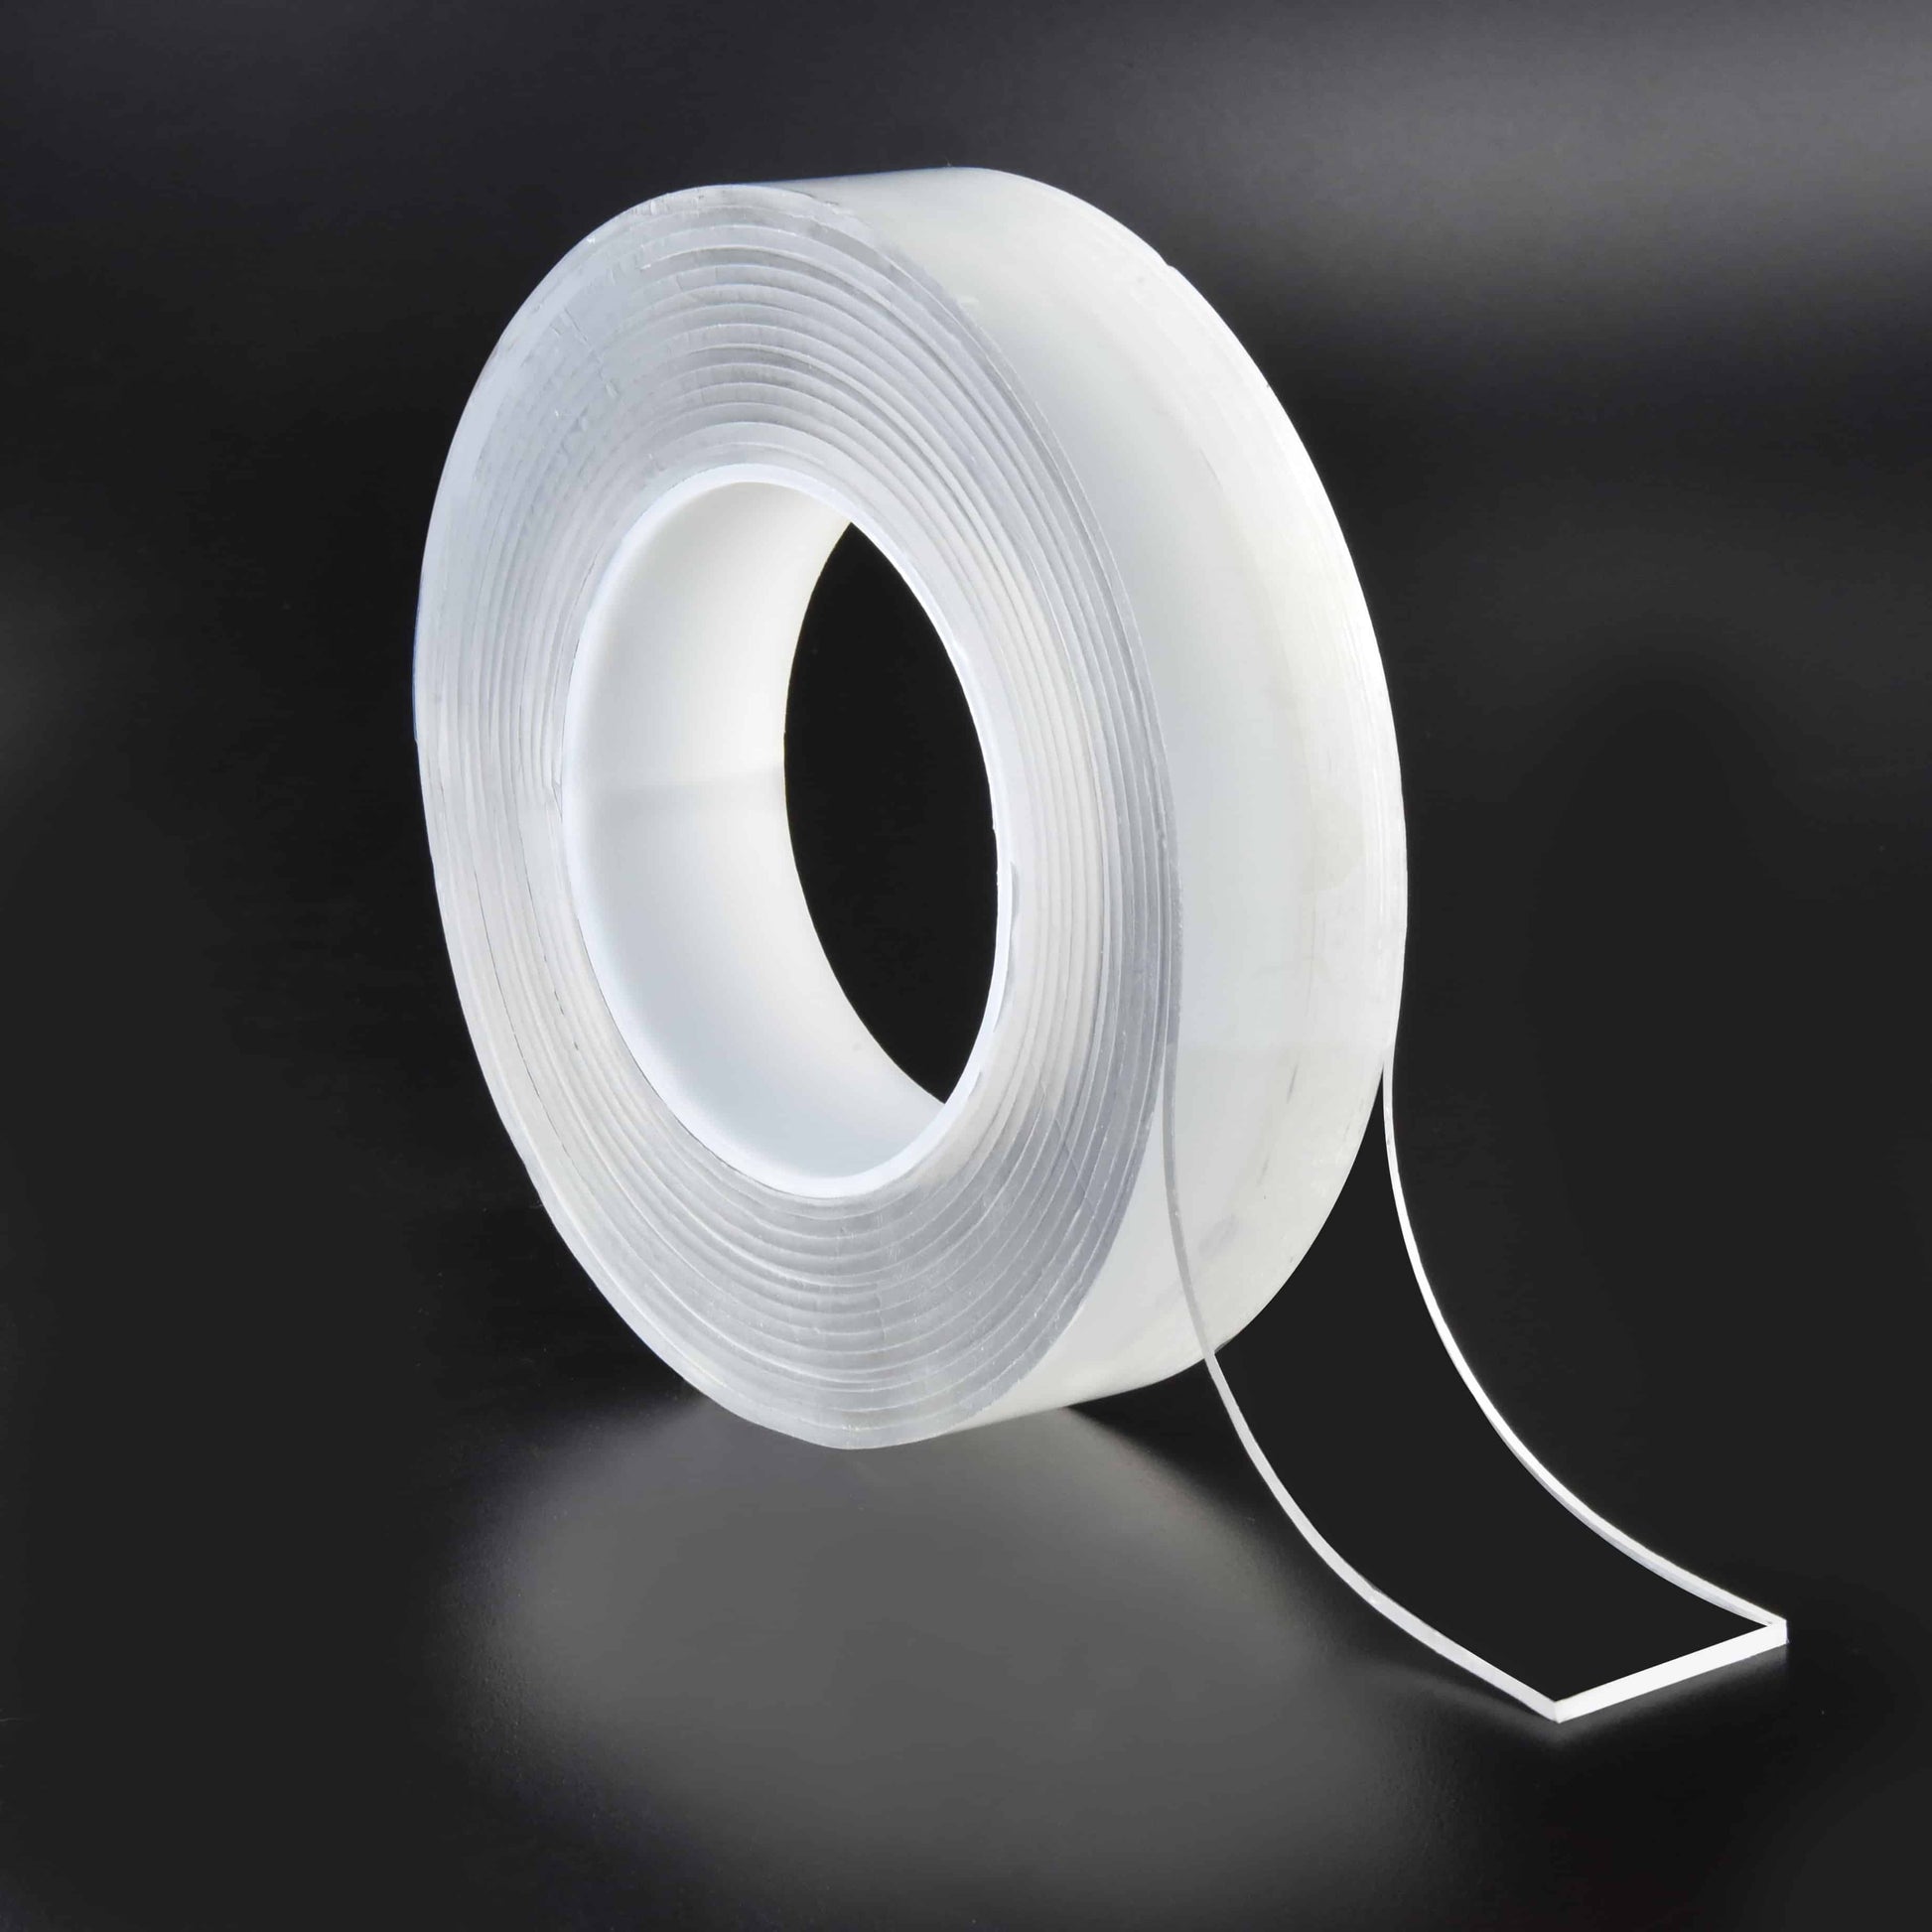 Nano Tape - Carpet Tape Double Sided Heavy Duty - Sticky Tape for